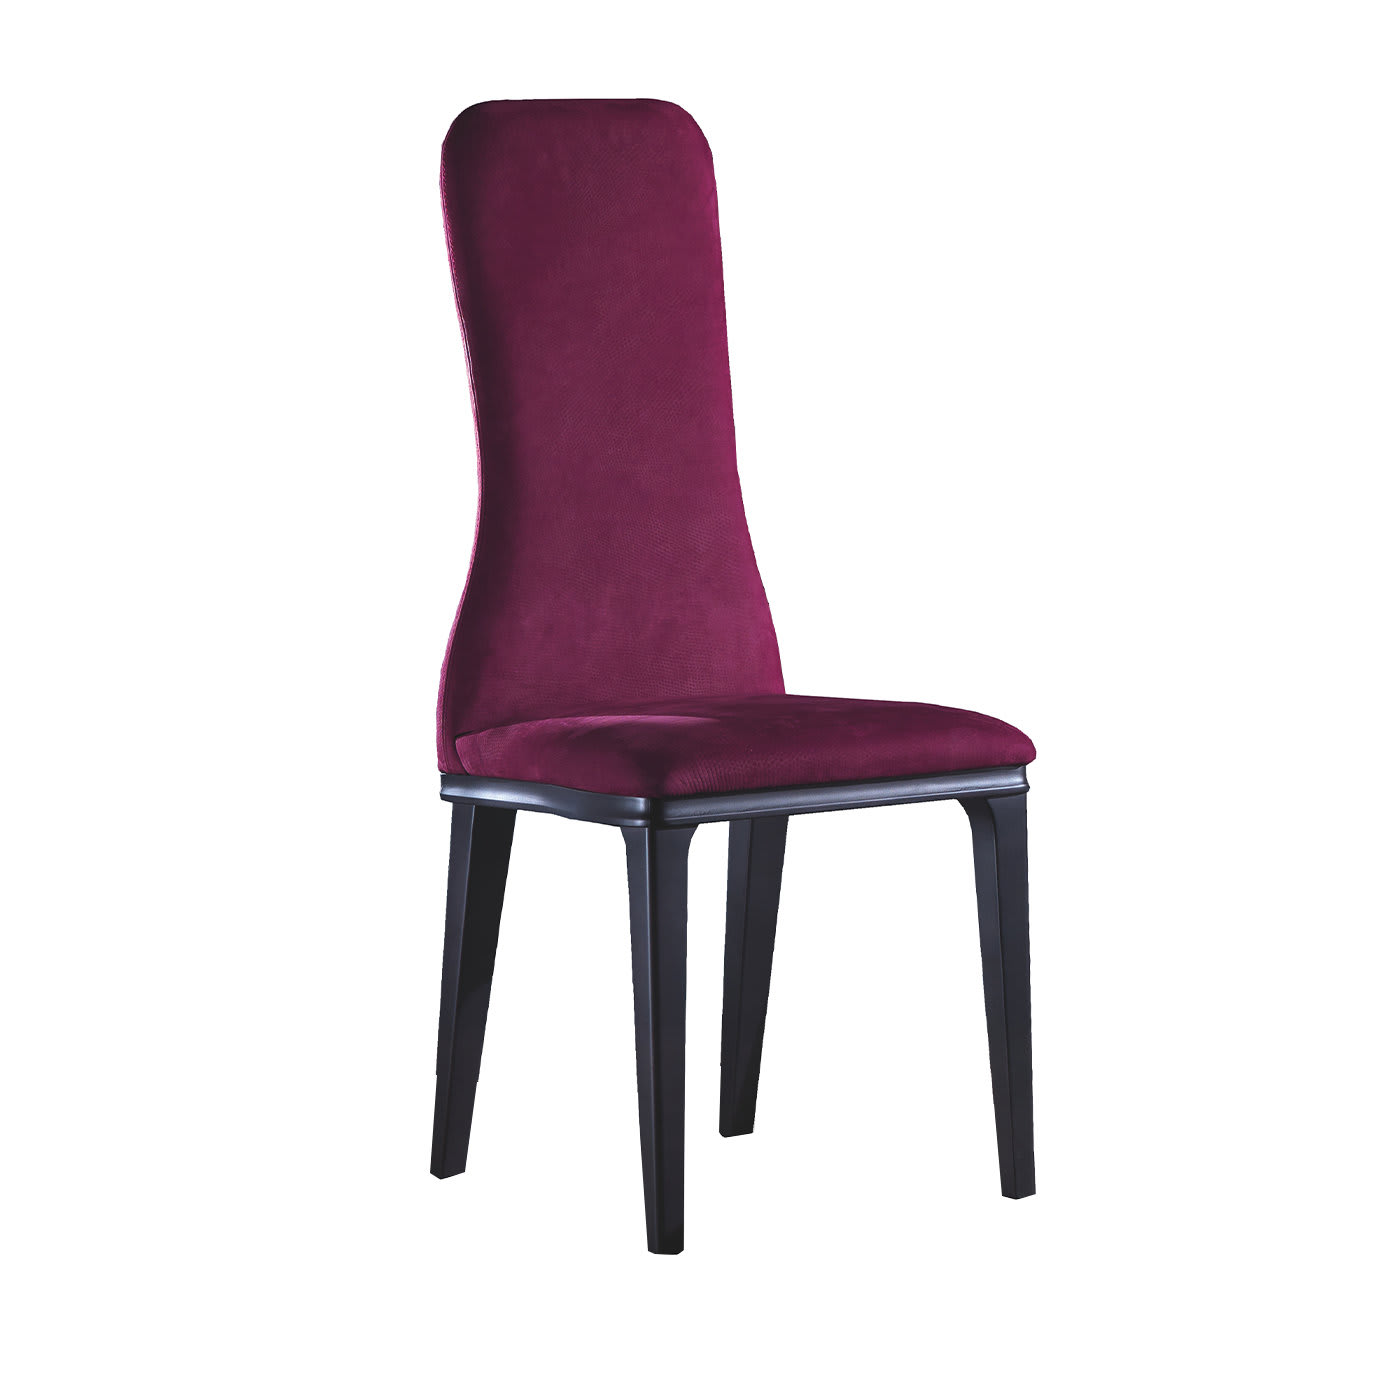 Optical Leather Padded Chair - Carpanelli